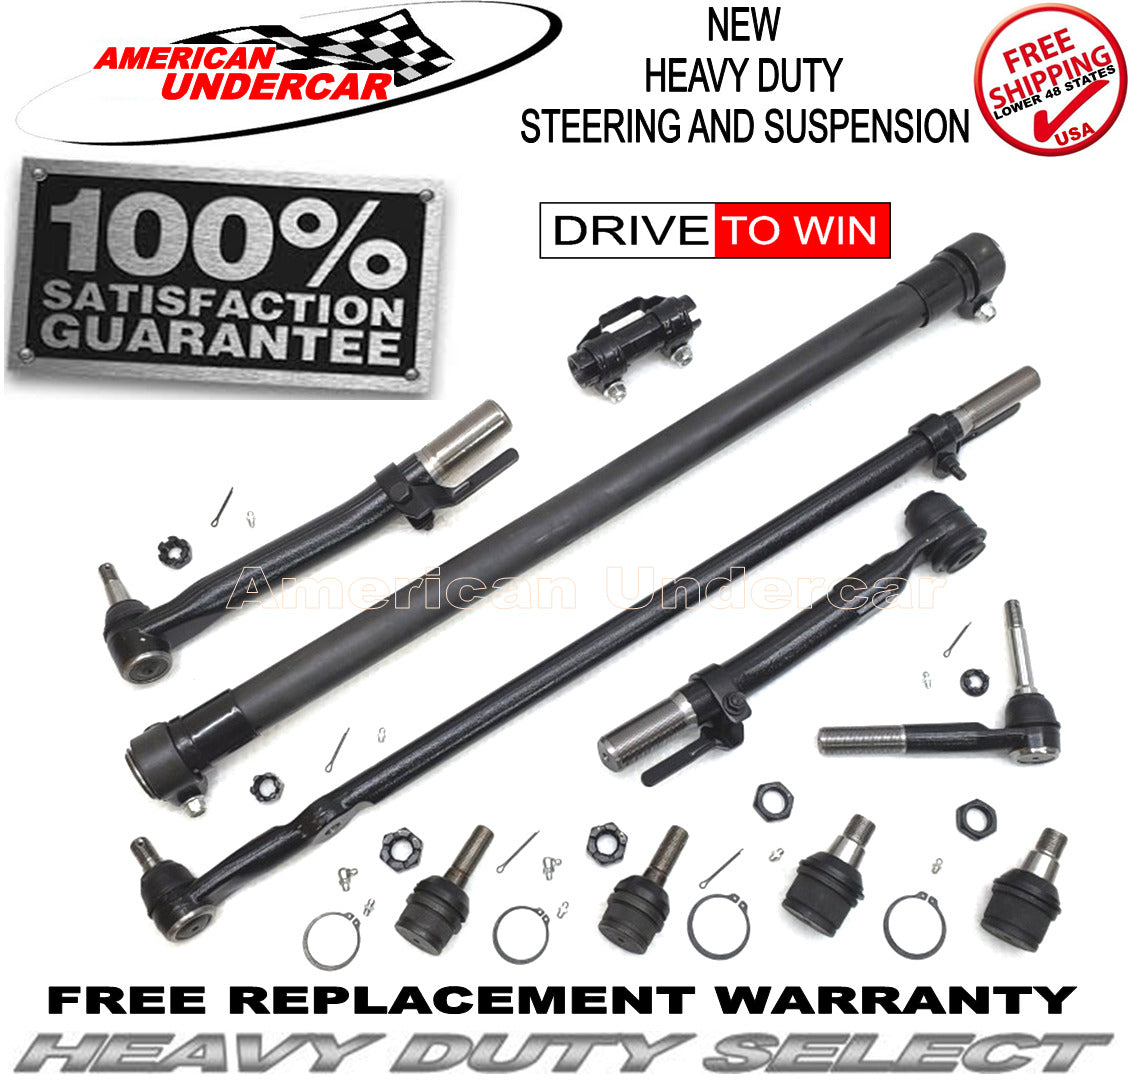 HD Ball Joint Tie Rod Sleeve Steering Kit for 2005-2007 Ford F250, F350 4x4